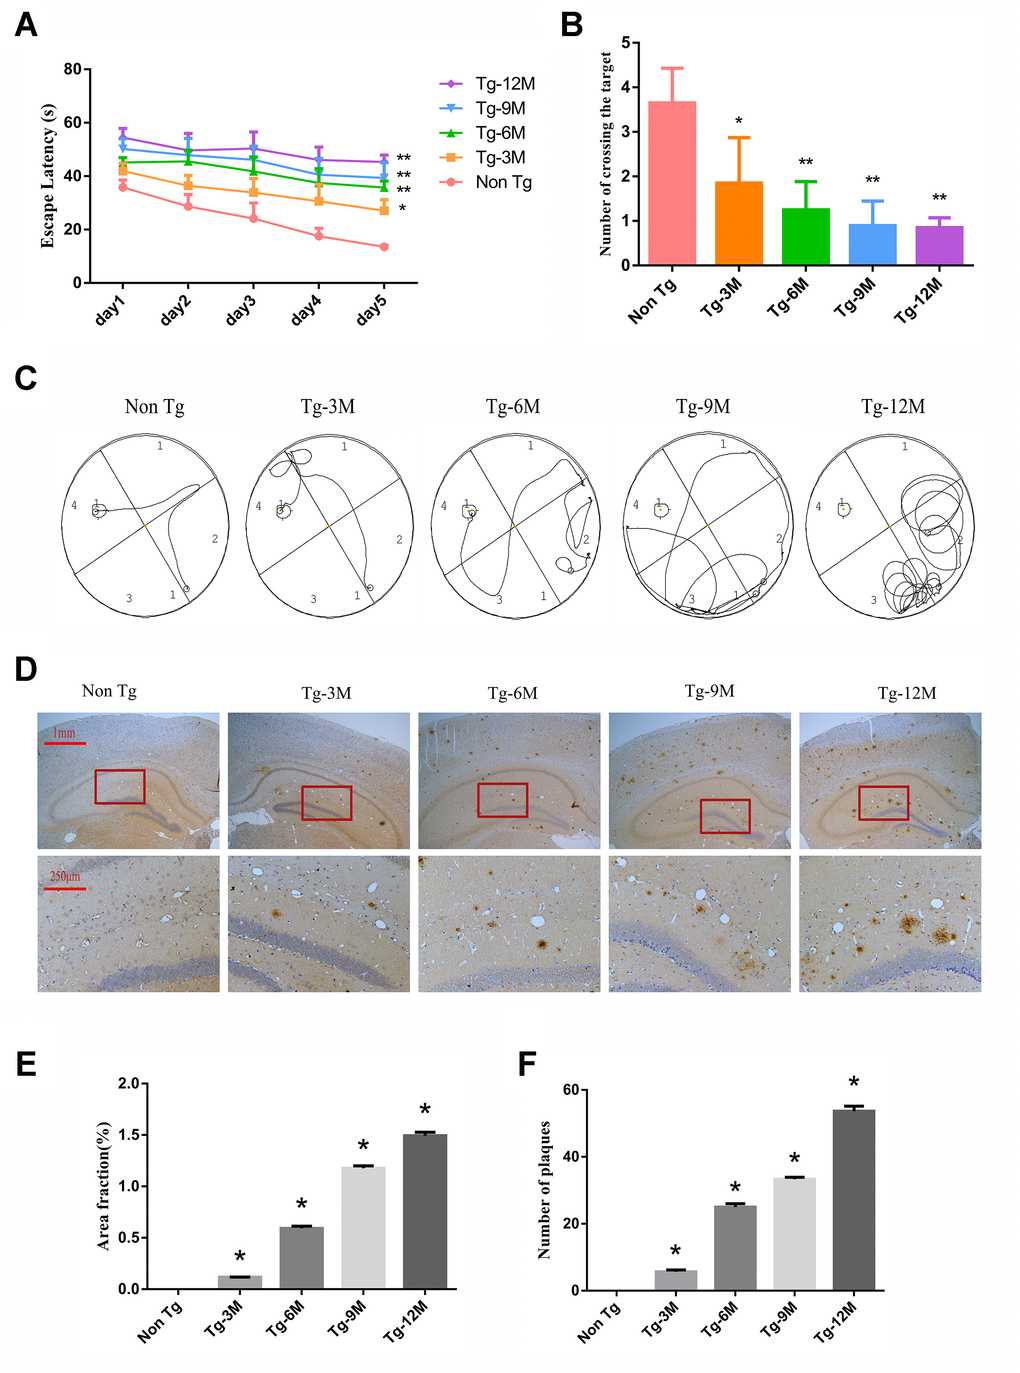 Cognitive function was impaired and insoluble Aβ deposition increased in hippocampus of APP/PS1 double transgenic mice. (A) The escape latency during 5 days of the MWM test. (B) Number of crossing the target in the last day of the MWM test. (n=5, two-way repeated-measures ANOVA, Tukey's test, * PC) The representative route track map of each group of mice. (D) Immunohistochemical staining shows amyloid protein expression in the hippocampus of different groups (Scale bar=1 mm, Scale bar=250 μm). (E, F) Area fraction and number of plaques of amyloid protein in each group. (* P